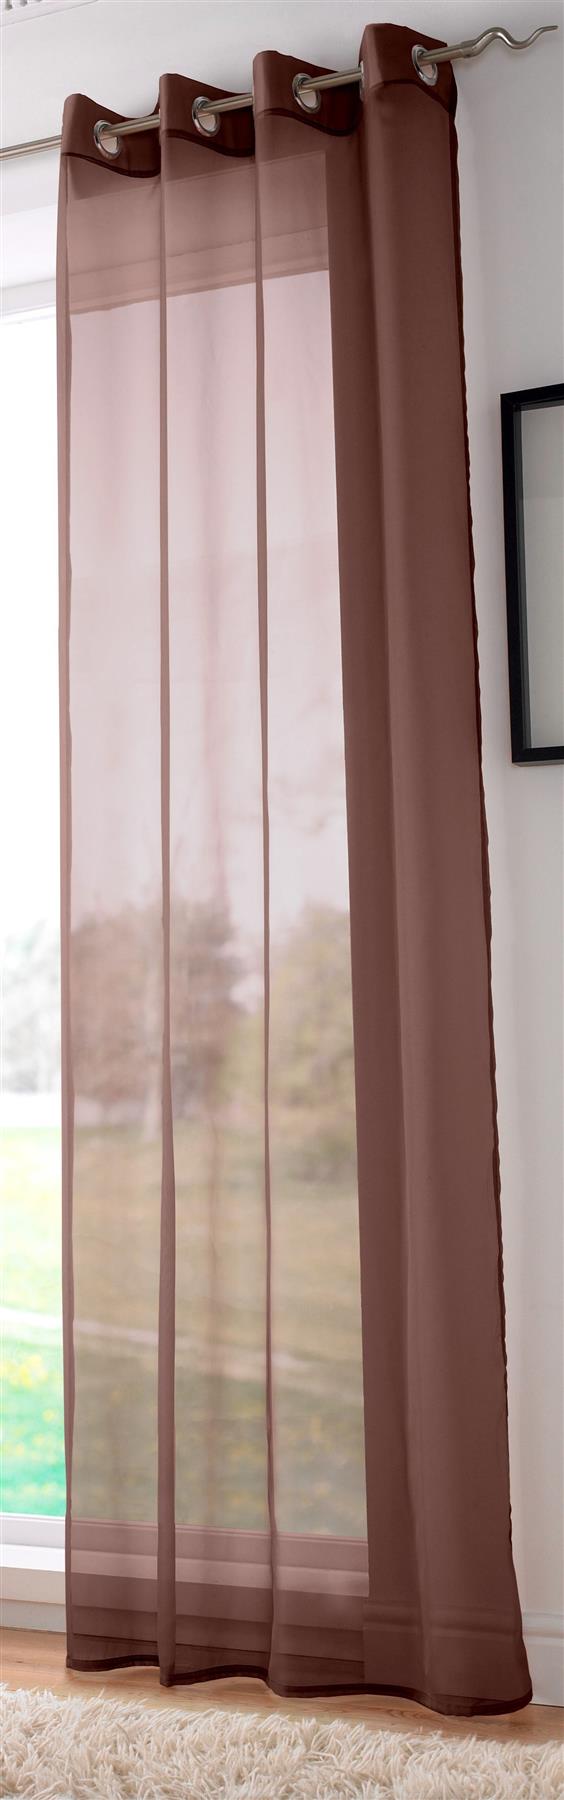 Chocolate Plain Voile Eyelet Panel. Including Free Tie Back